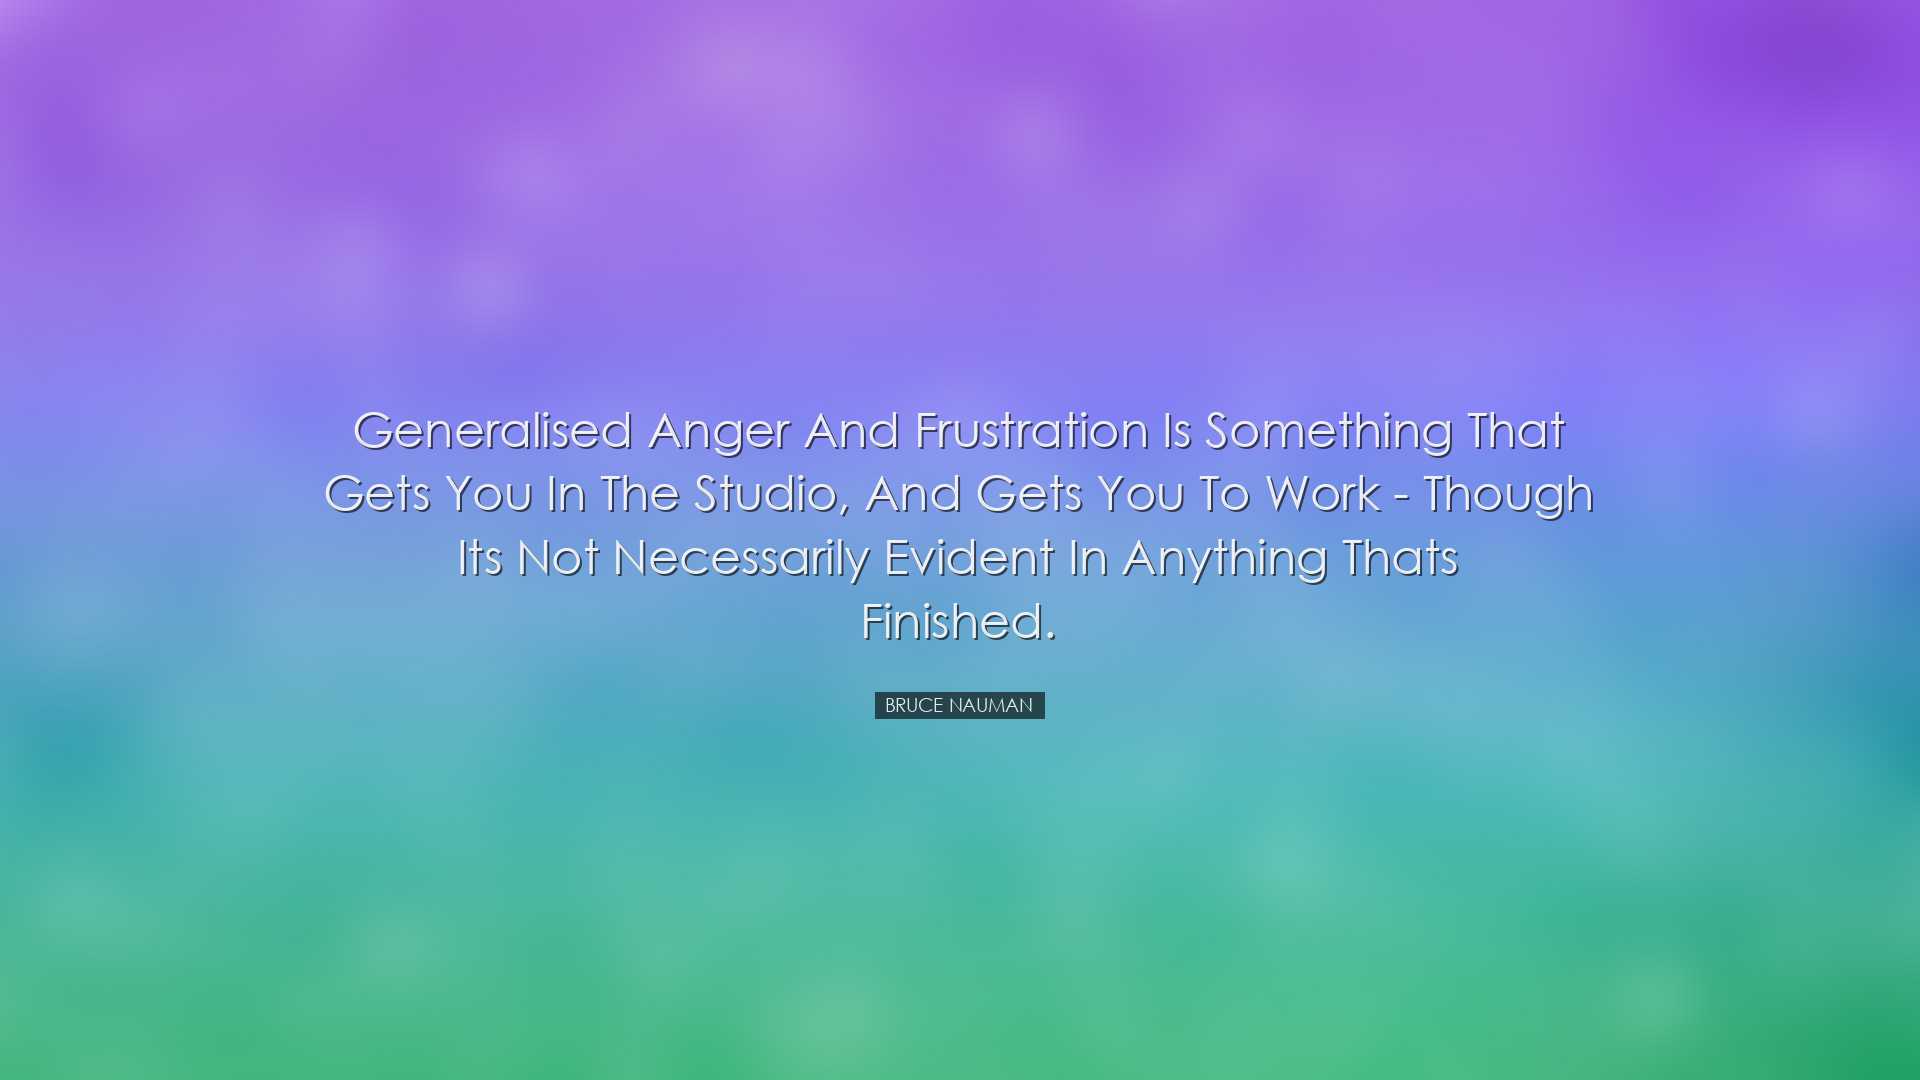 Generalised anger and frustration is something that gets you in th